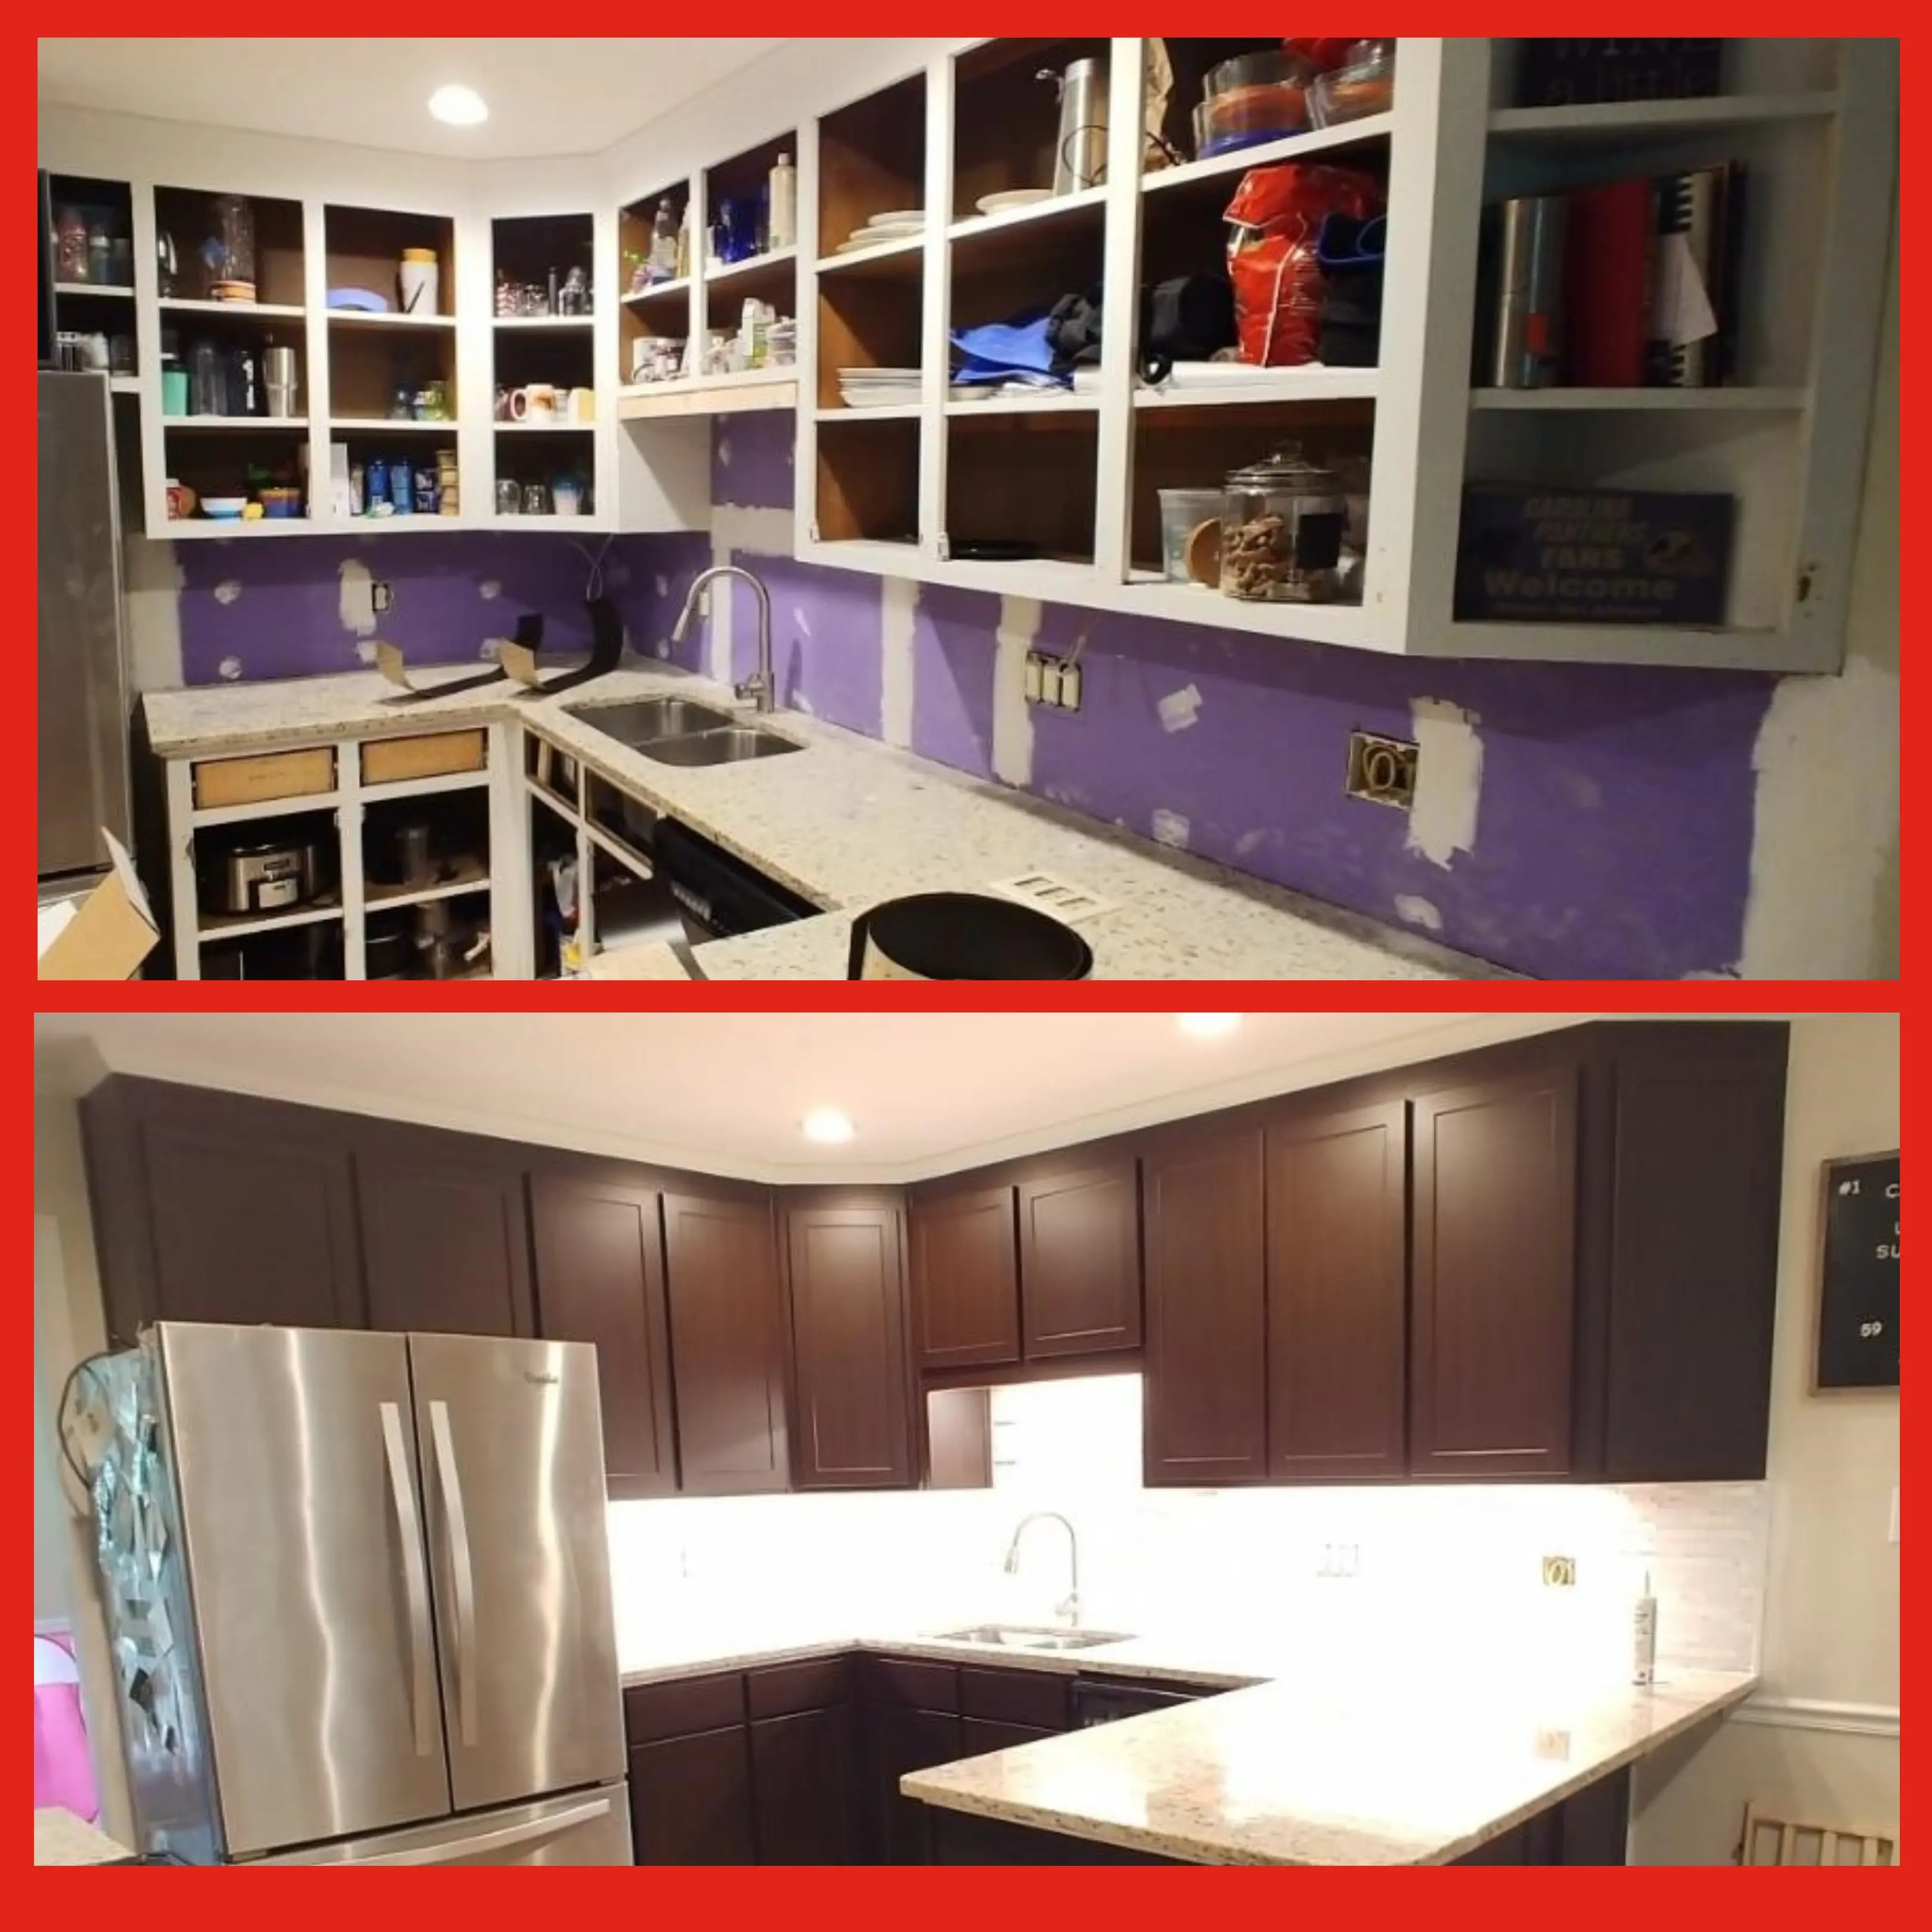 A kitchen with open shelving above the counter and the same kitchen after Mr. Handyman has replaced the shelves with new cabinets.